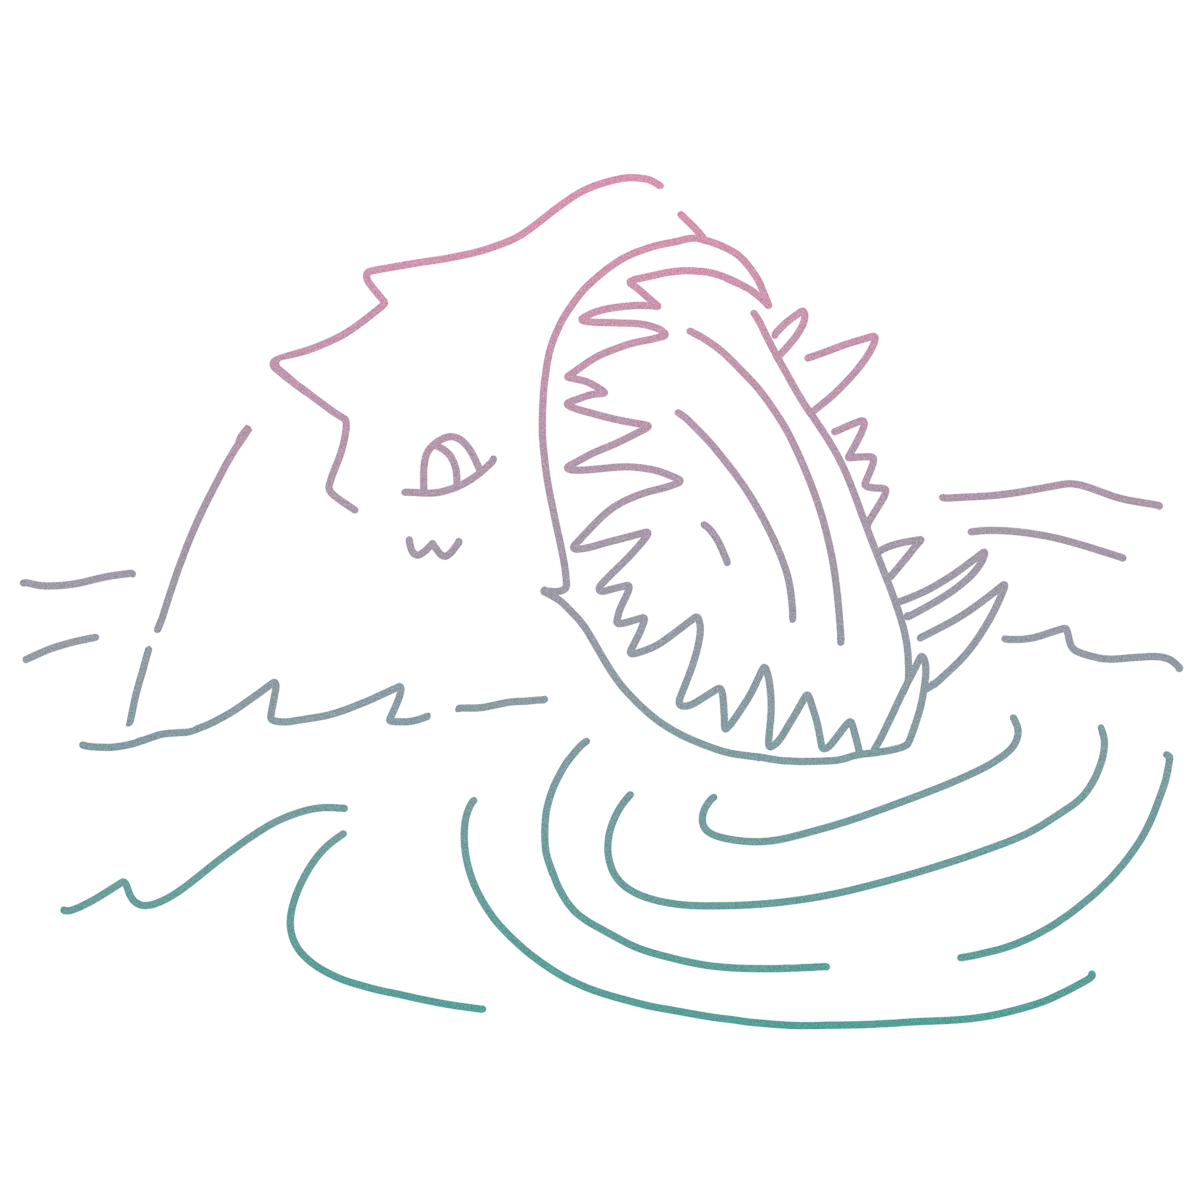 Line illustration of the mythical creature Charybdis 